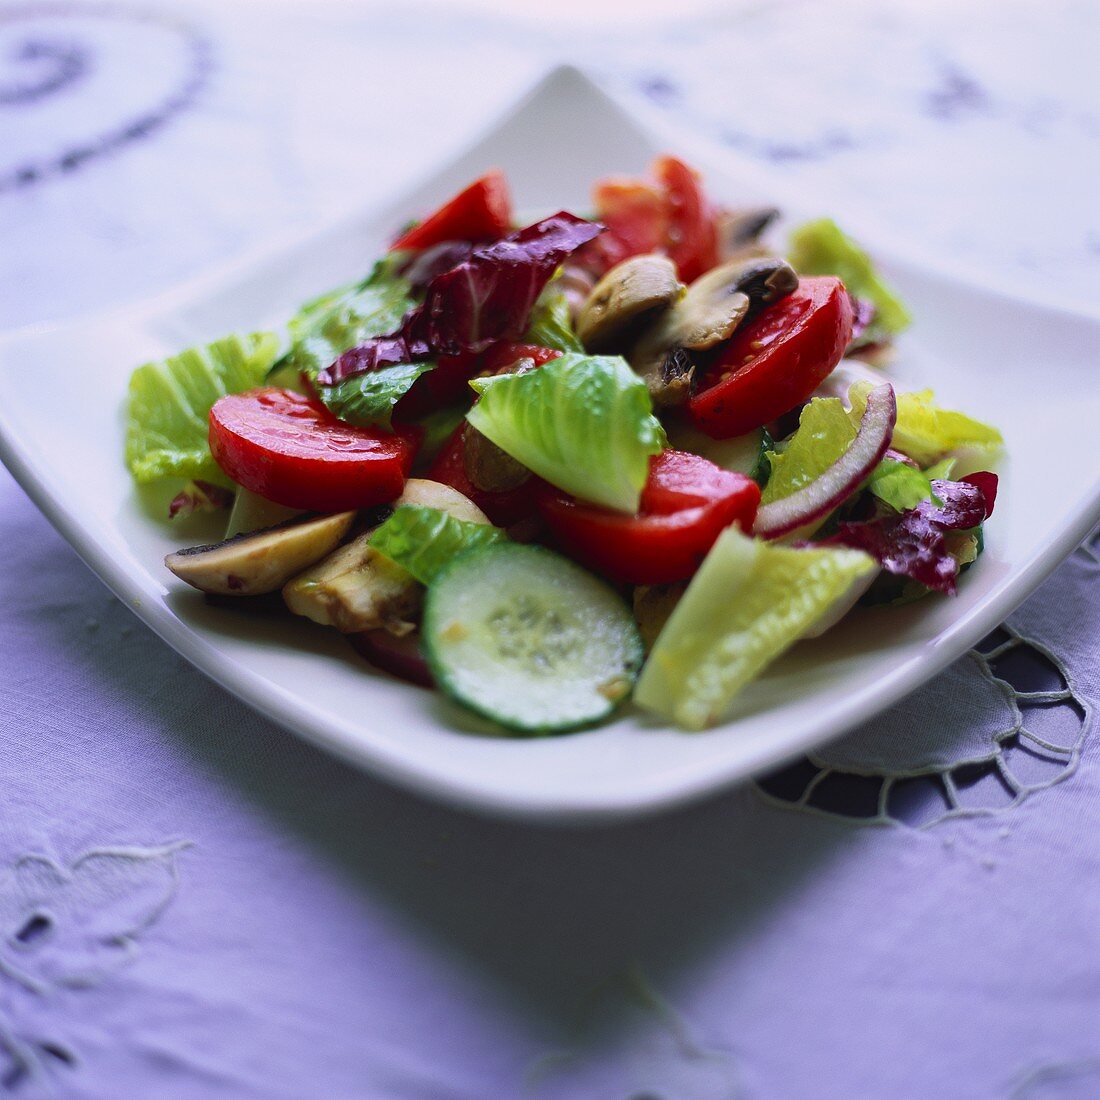 Mixed salad leaves with vegetables and mushrooms